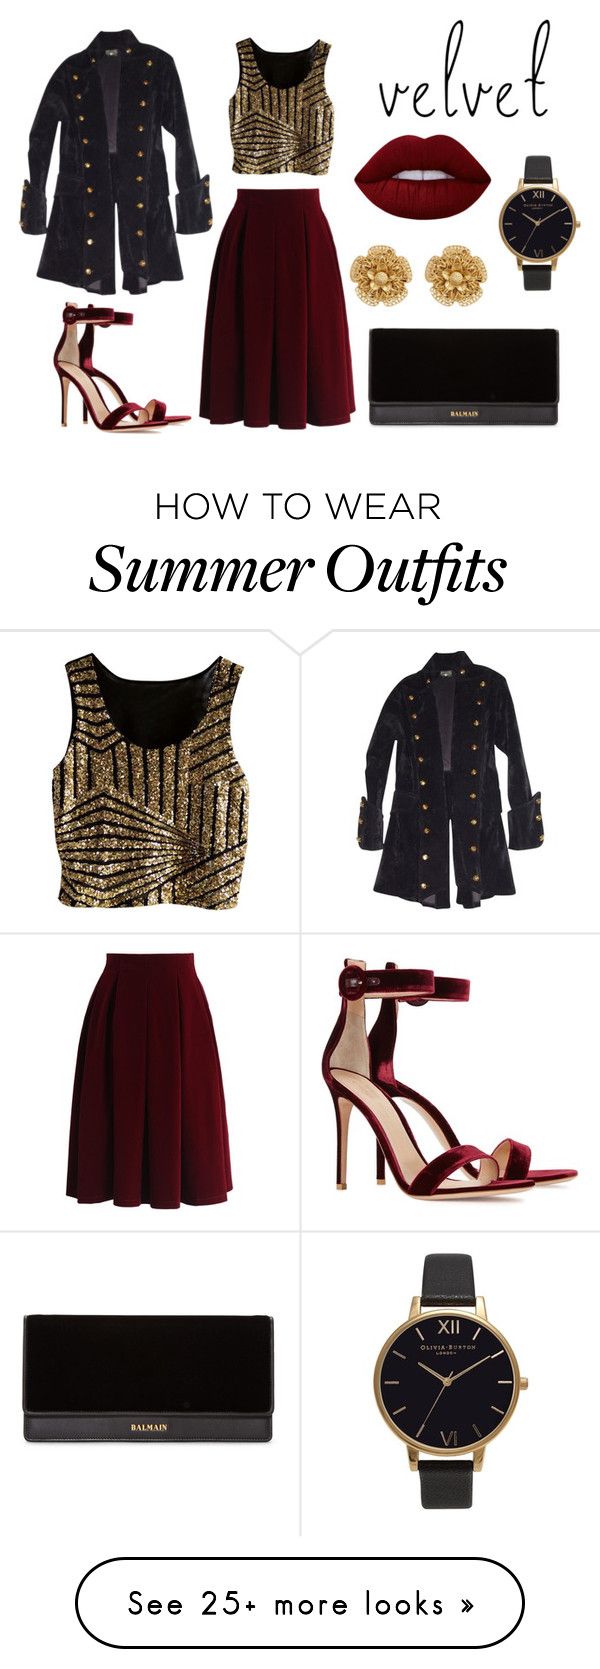 "Velvet Outfit" by thejen714 on Polyvore featuring Gianvito Rossi, Chi...